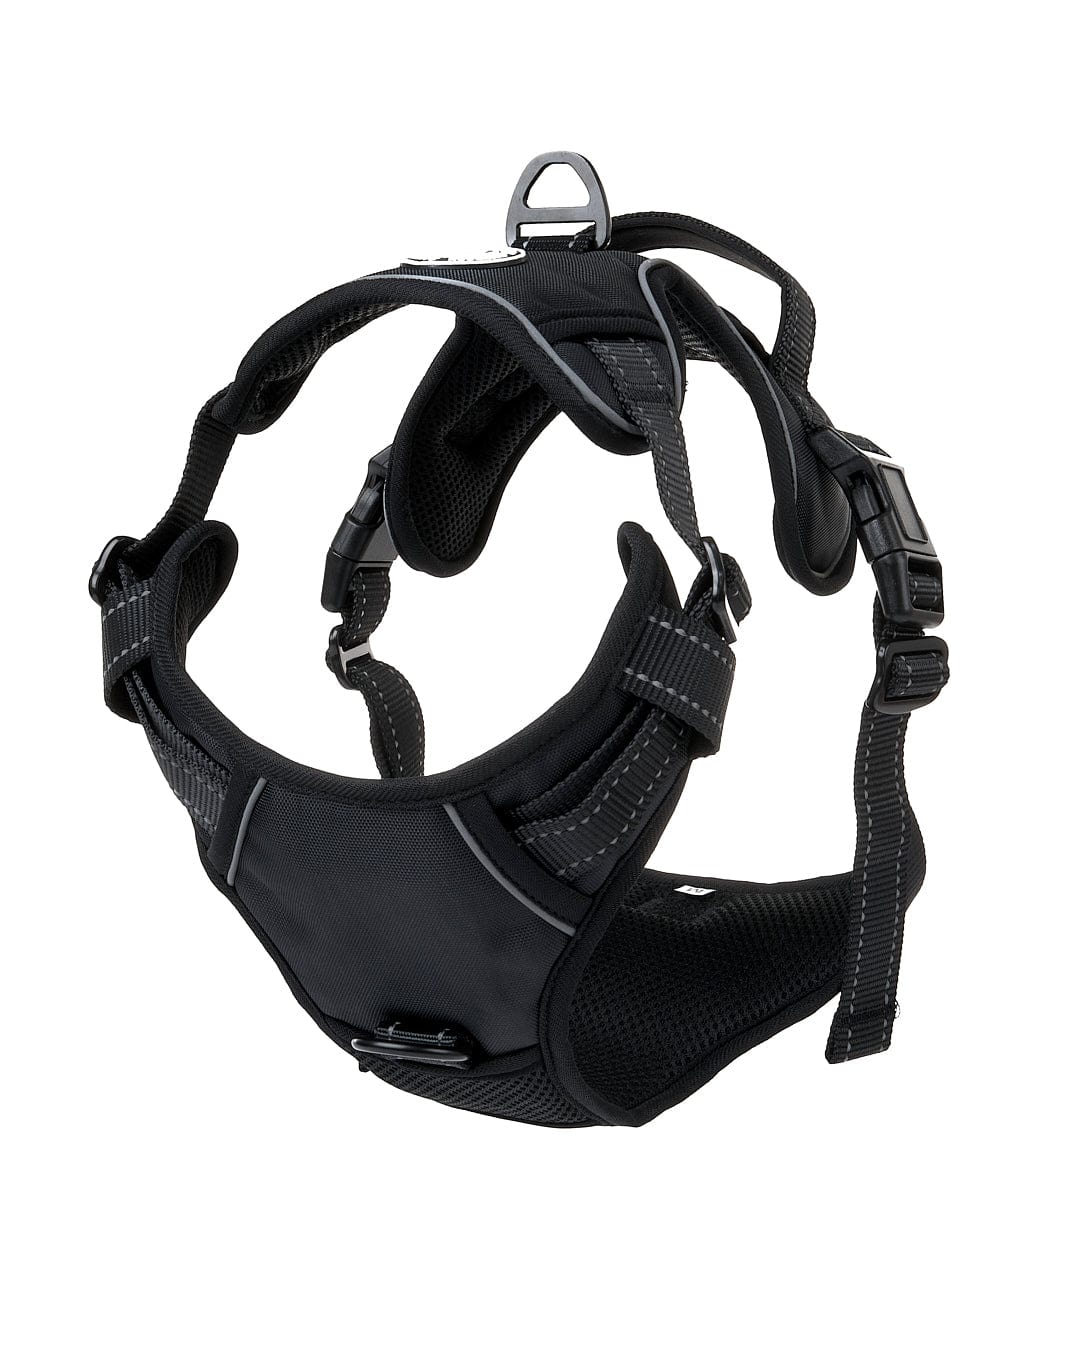 A Saltrock branded pet harness in black with adjustable straps on a white background.